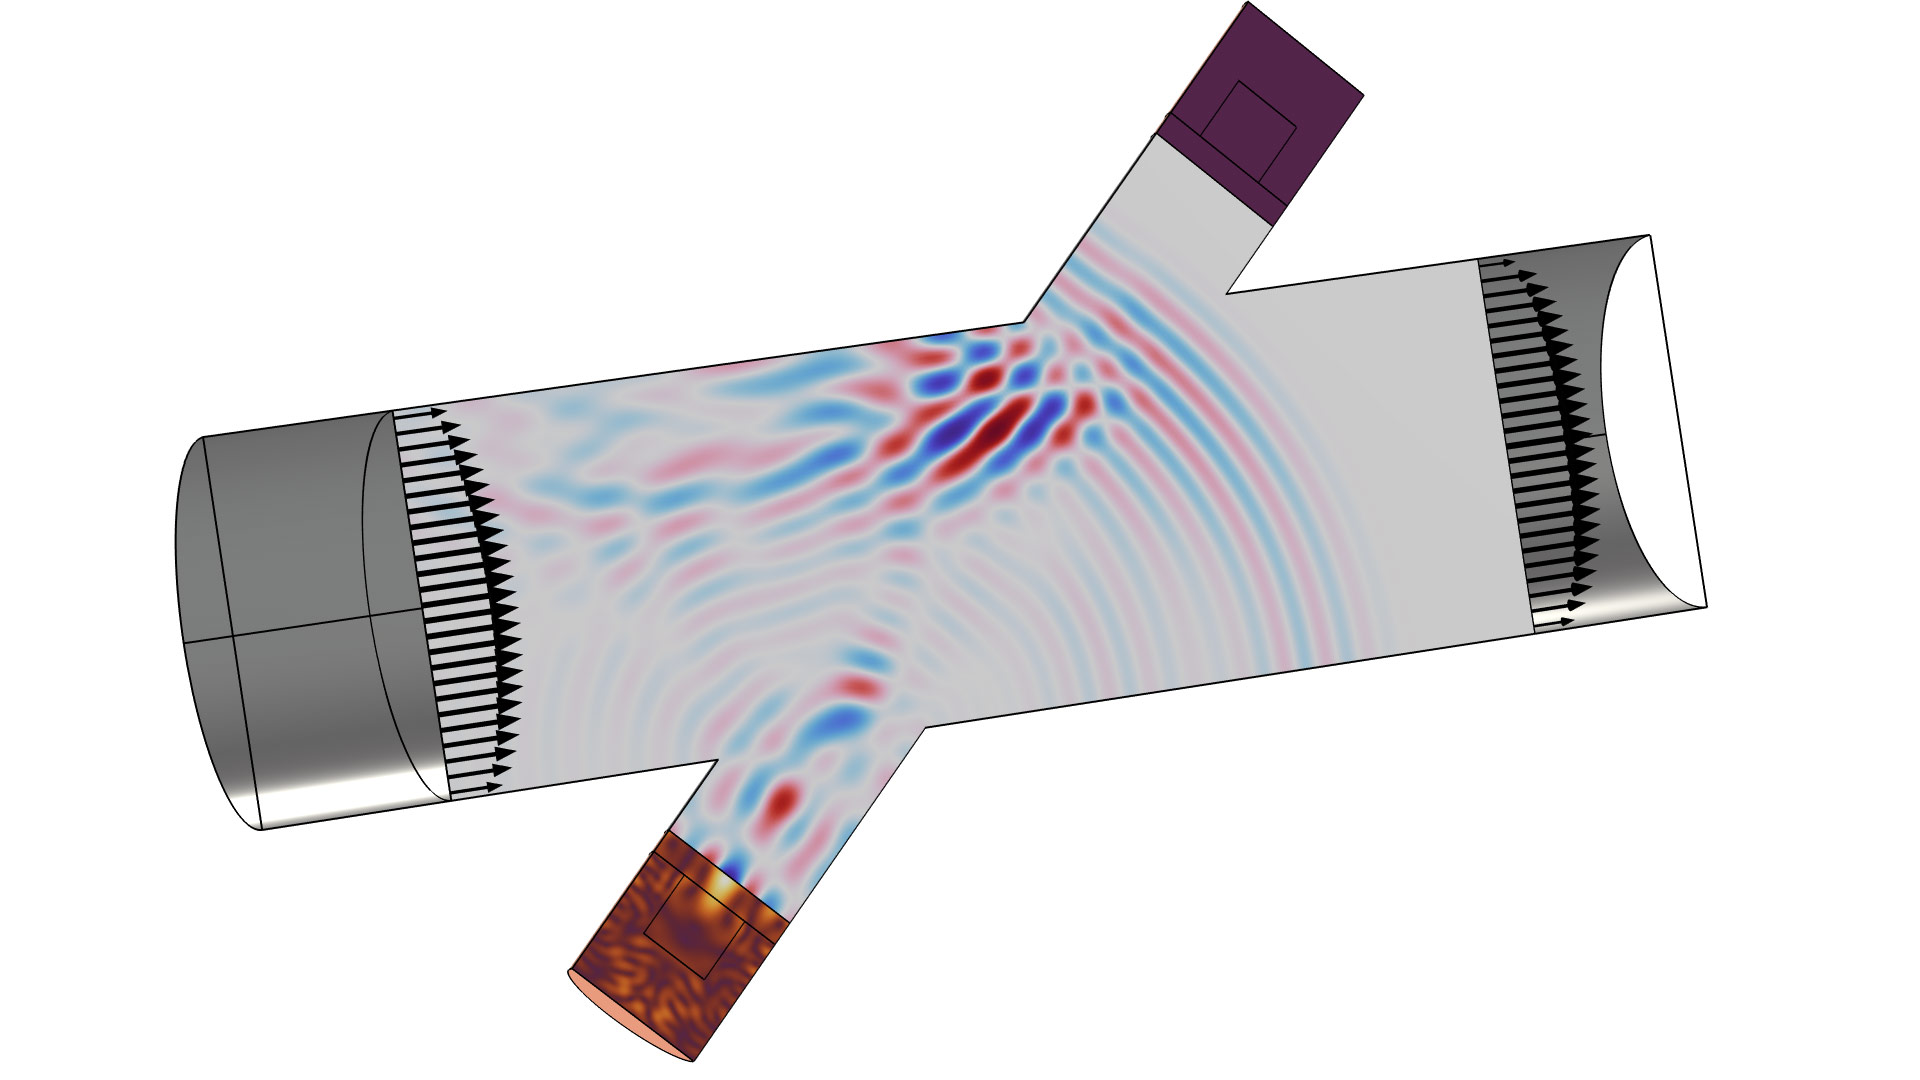 An ultrasonic flowmeter model showing the acoustic signal in the Wave color table.